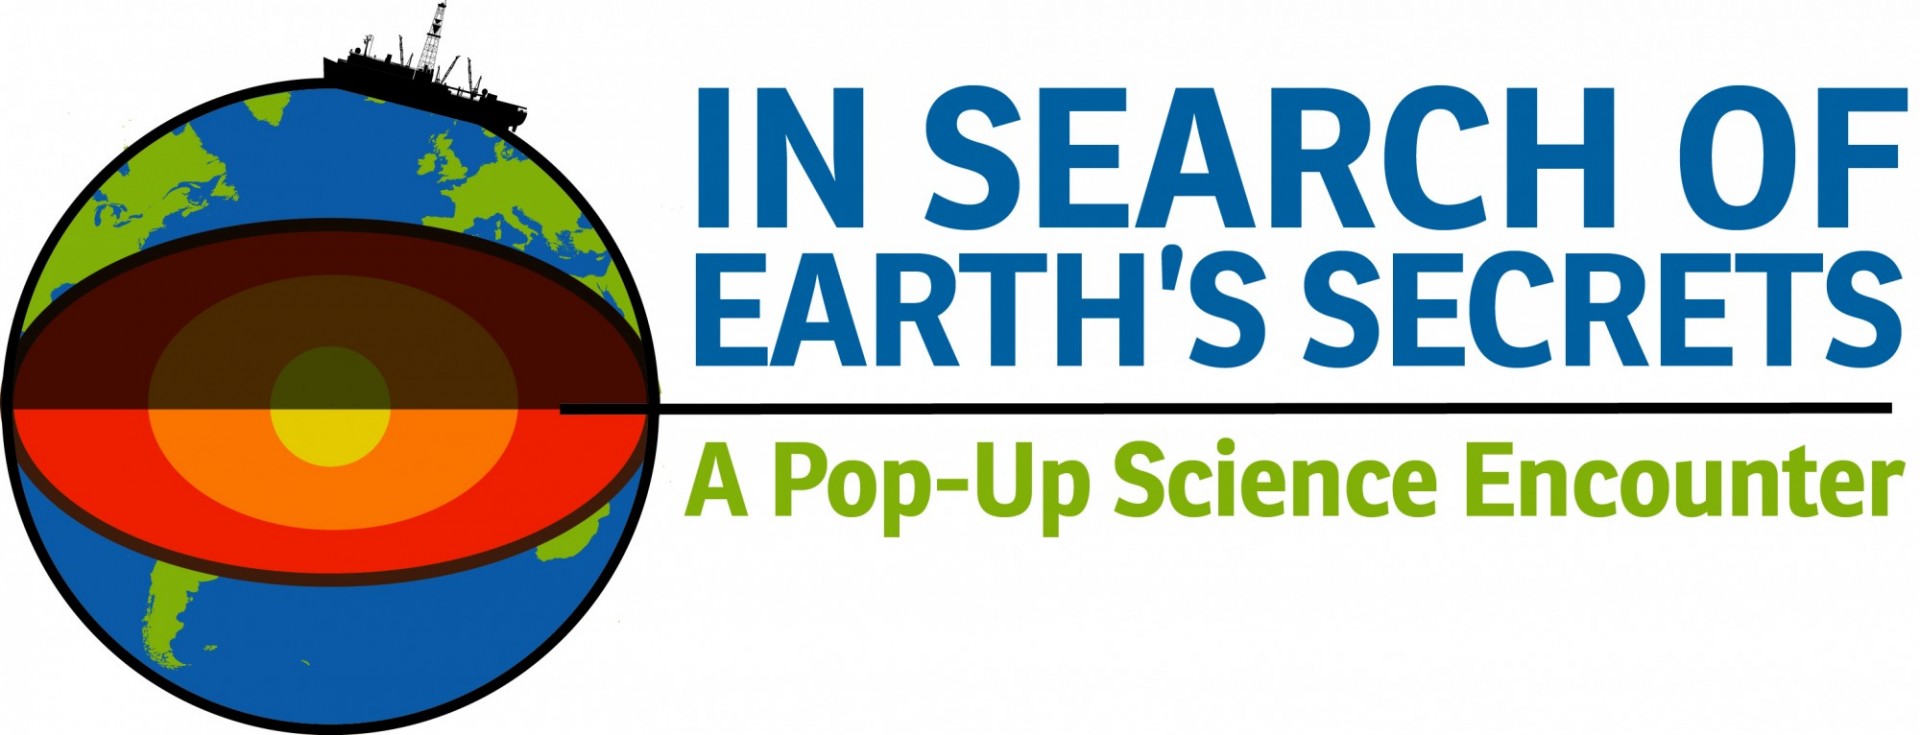 in search of Earth's secrets: a pop-up science encounter